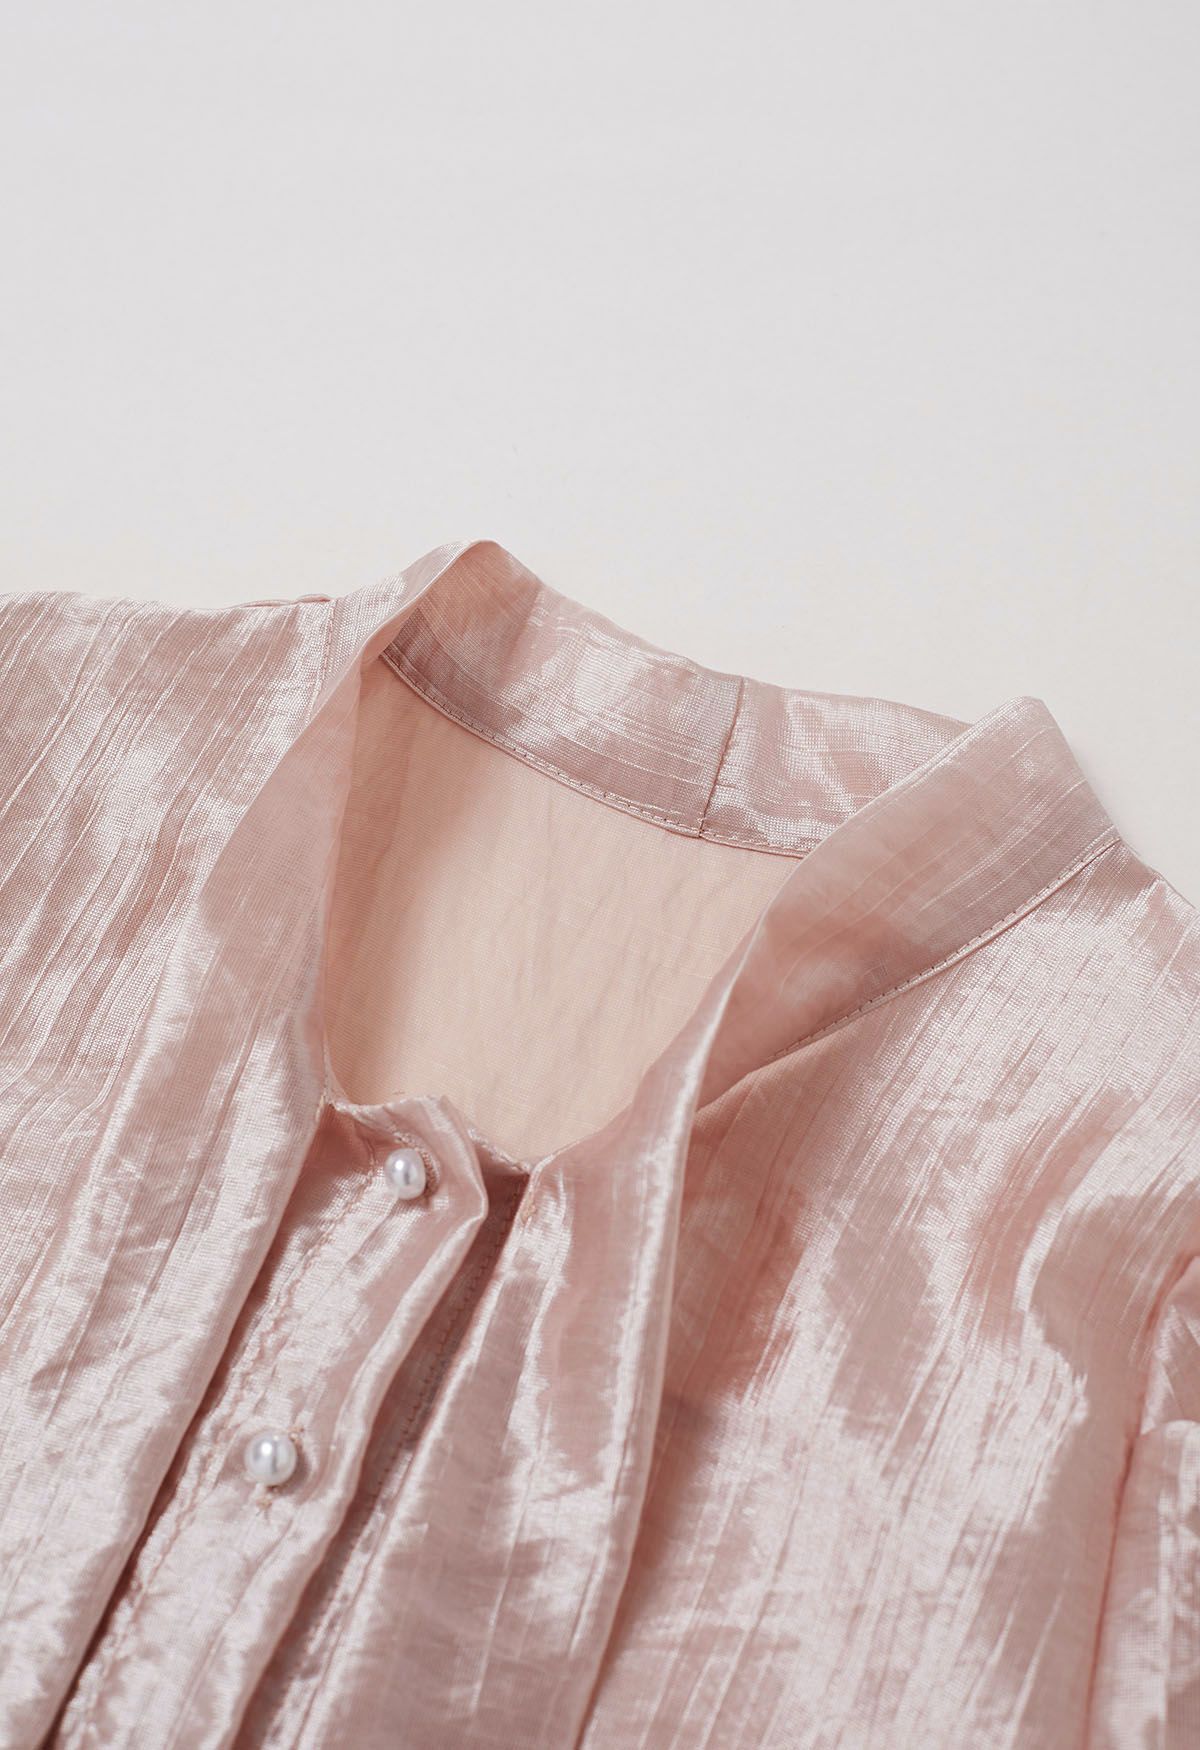 Texture Satin Self-Tie Bowknot Shirt in Coral